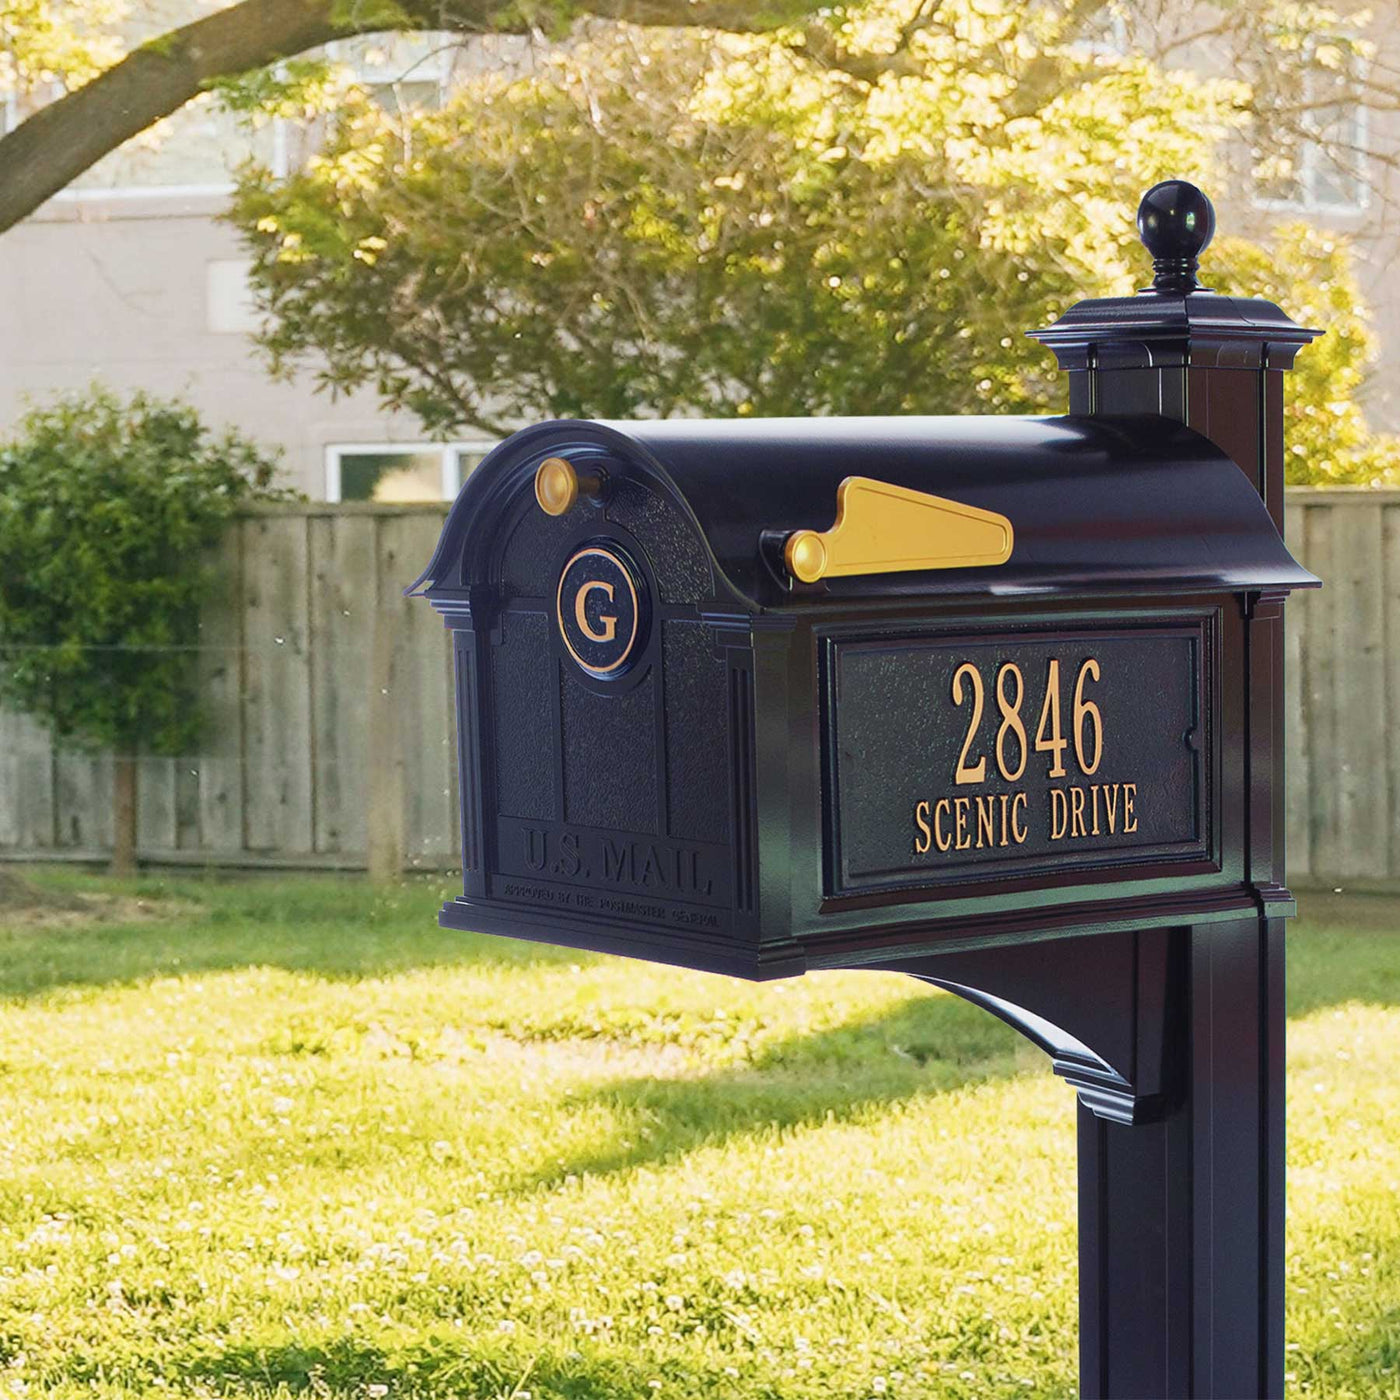 high quality residential decorative black mailbox with monogram letter plaque on the front and address plaque on the side details in gold accent